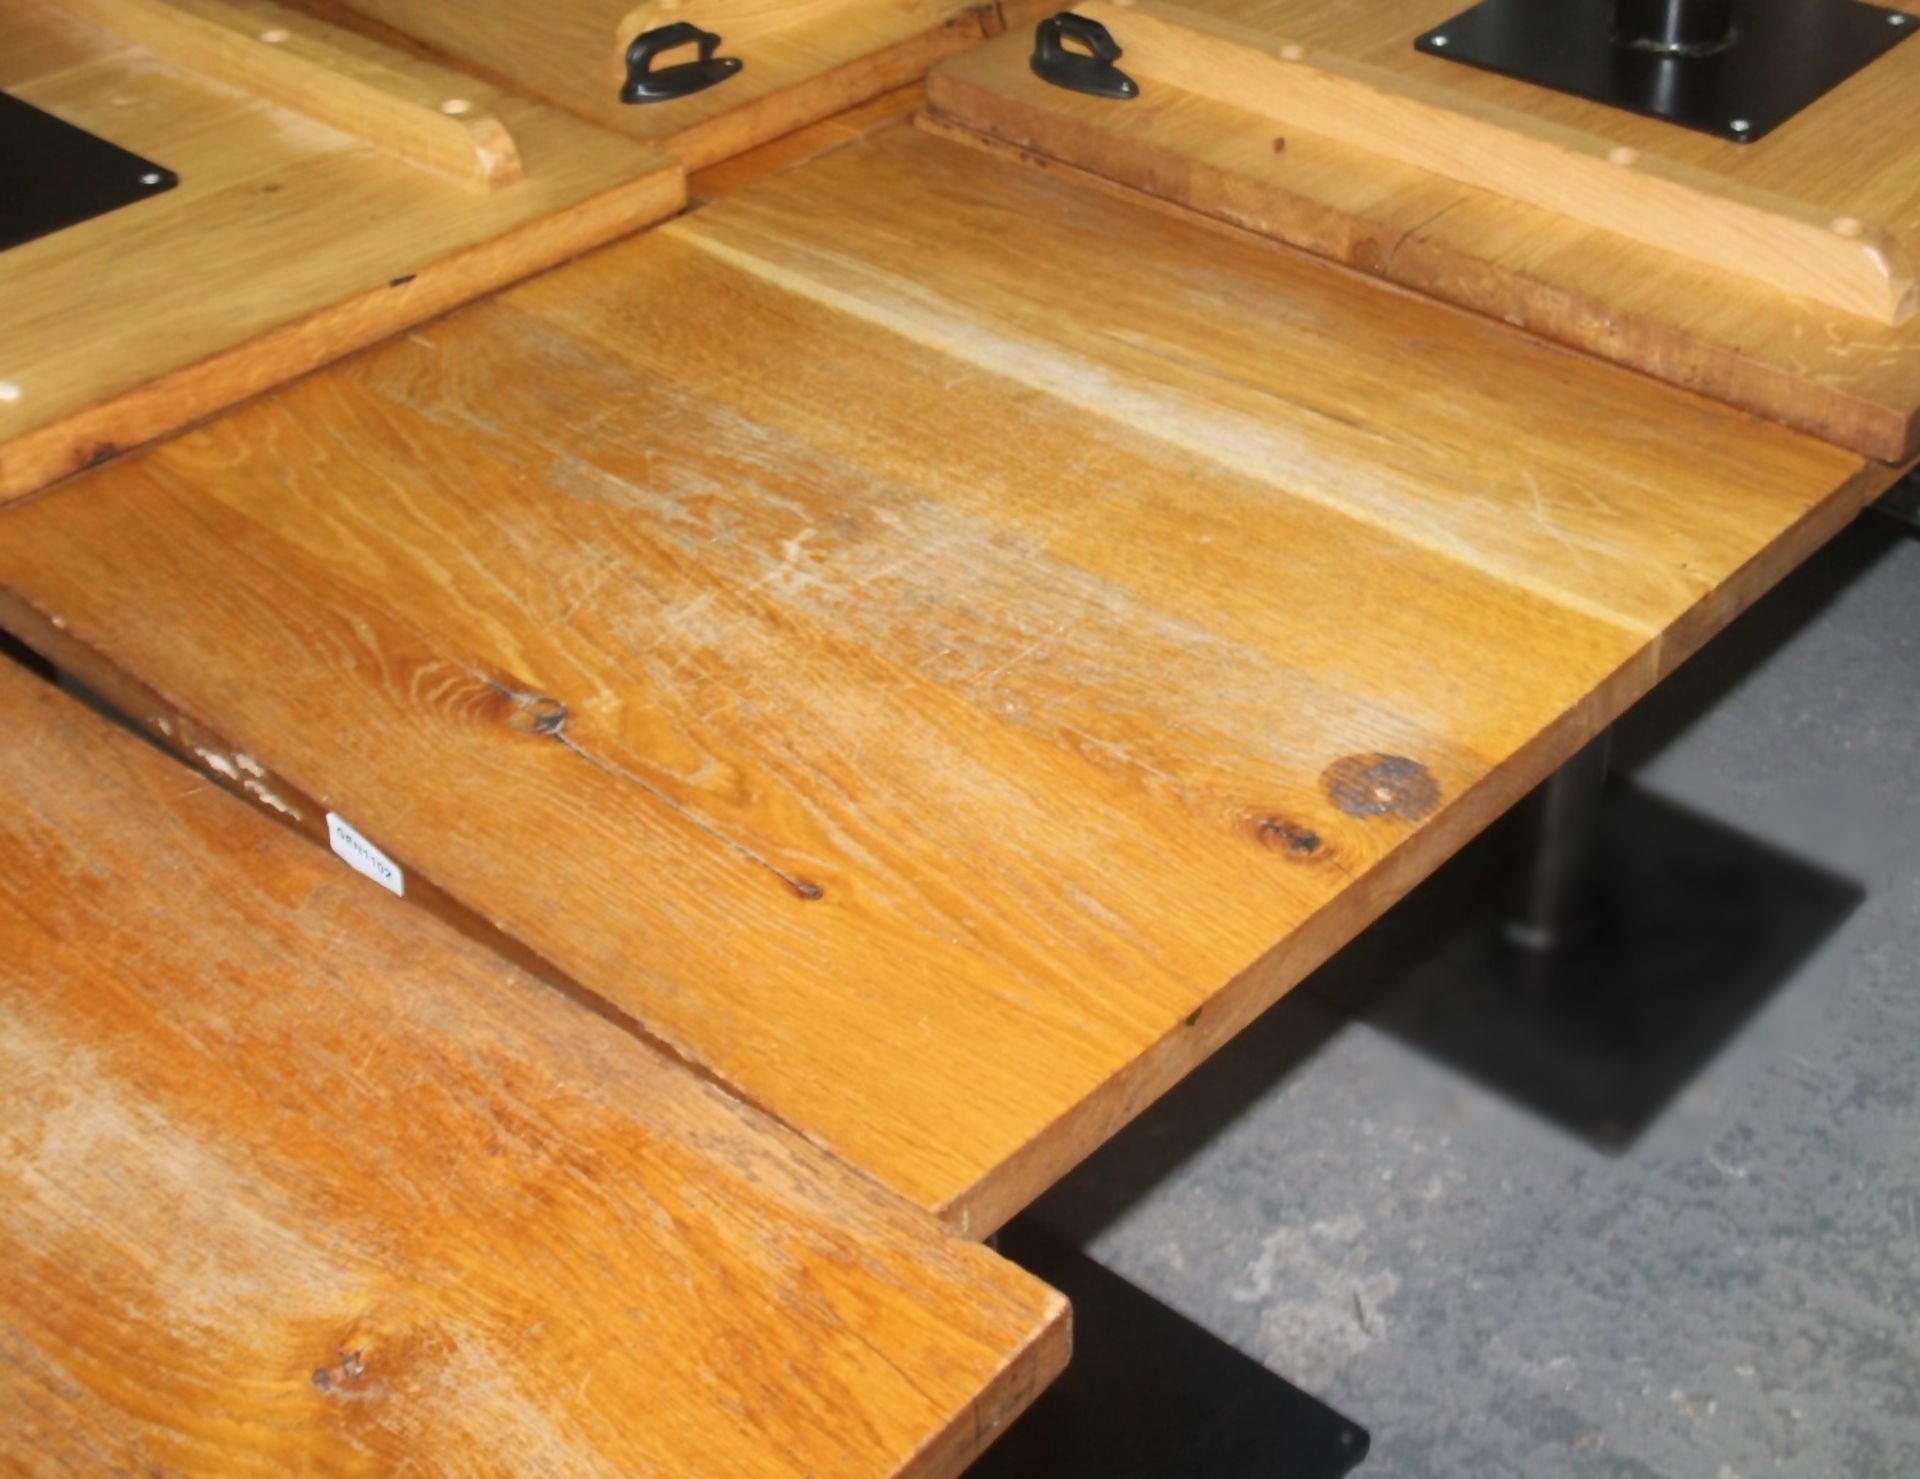 4 x Solid Oak Restaurant Dining Tables - Natural Rustic Knotty Oak Tops With Black Cast Iron Bases - - Image 6 of 8